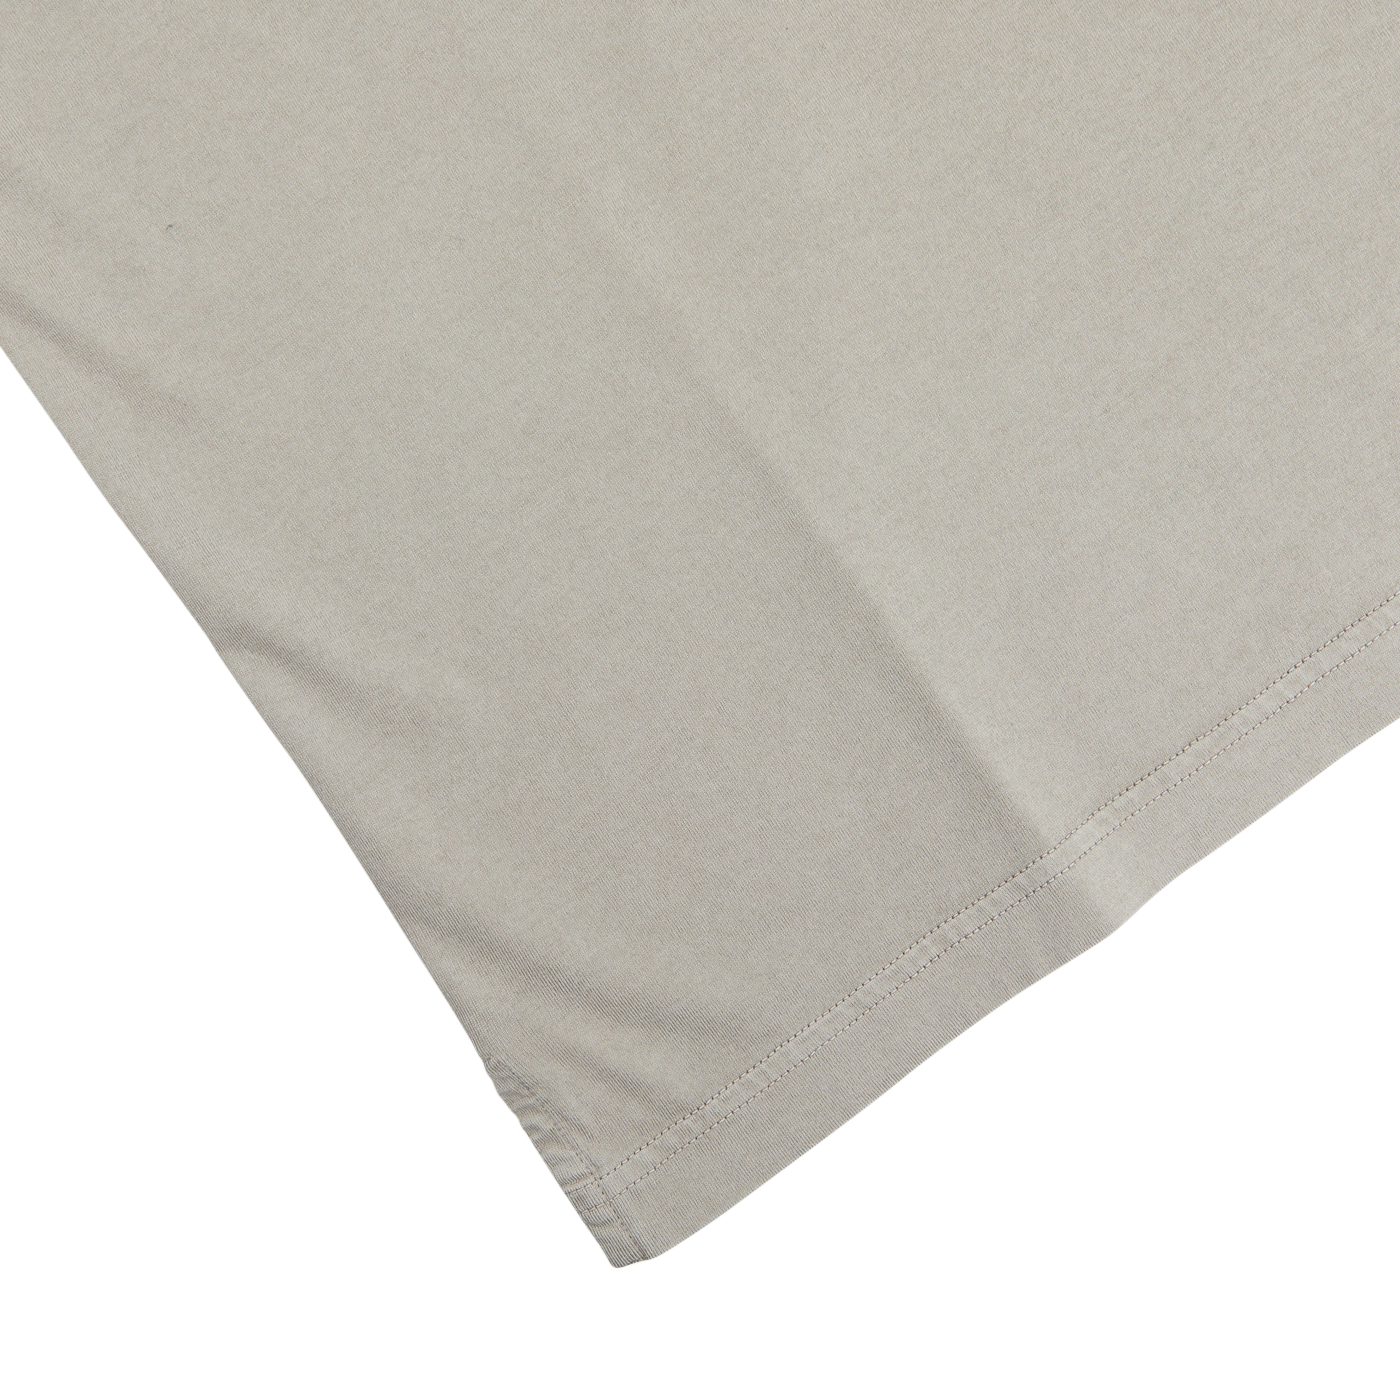 A luxury taupe beige Fedeli organic cotton LS polo shirt on a white surface.